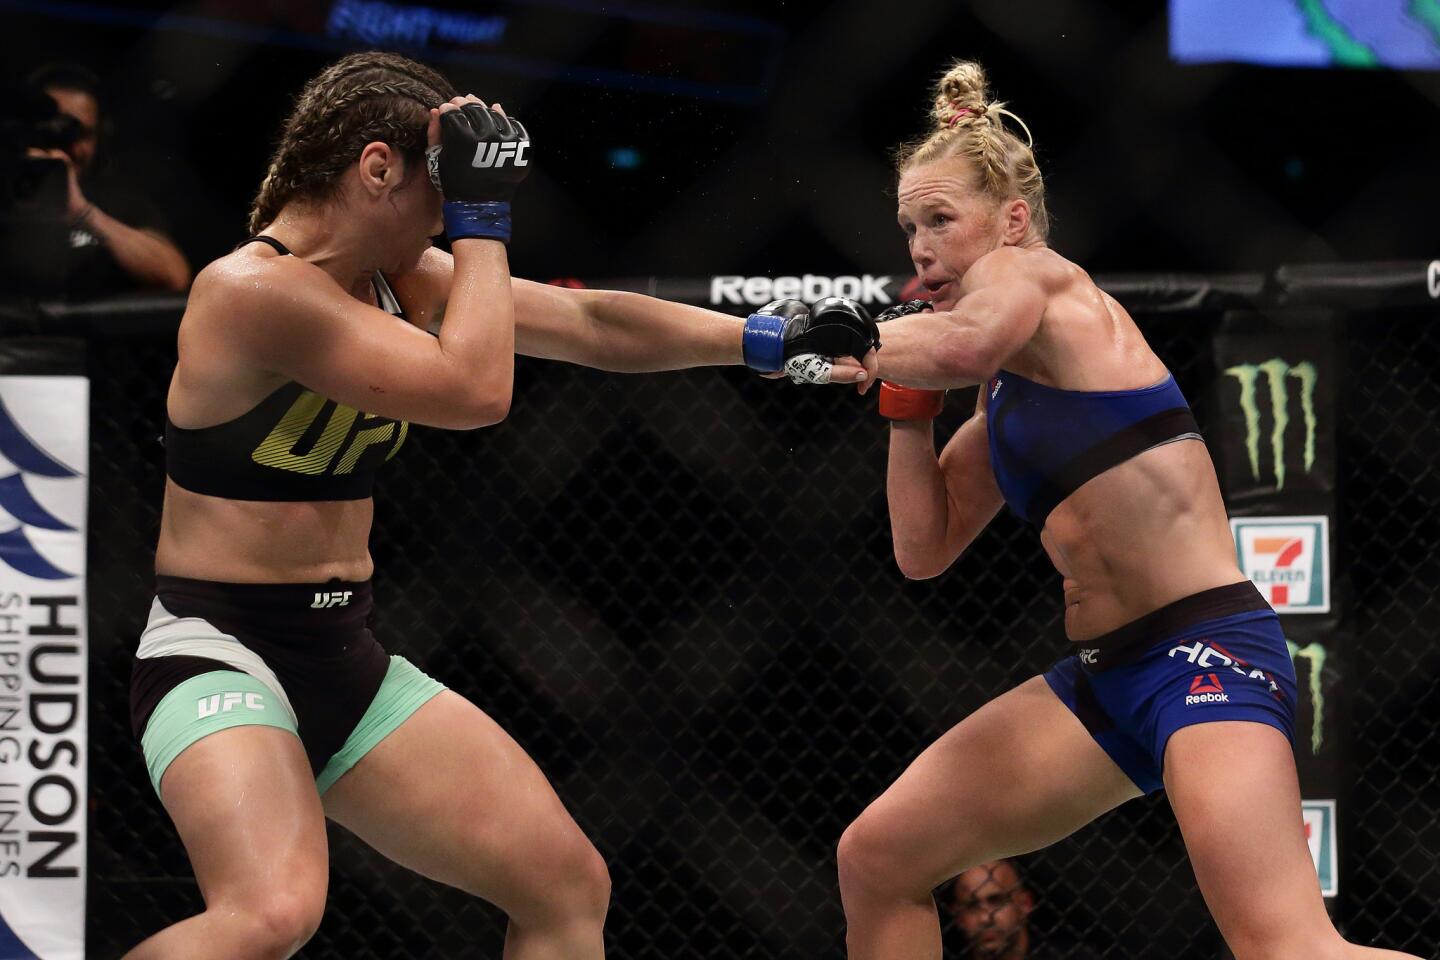 SINGAPORE - JUNE 17: Holly Holm of United States (R) fights Bethe Correia of Brazil (L) in the Women's Bantamweight Main Event Bout during UFC Singapore Fight Night at Singapore Indoor Stadium on June 17, 2017 in Singapore. (Photo by Suhaimi Abdullah/Getty Images) ** OUTS - ELSENT, FPG, CM - OUTS * NM, PH, VA if sourced by CT, LA or MoD **